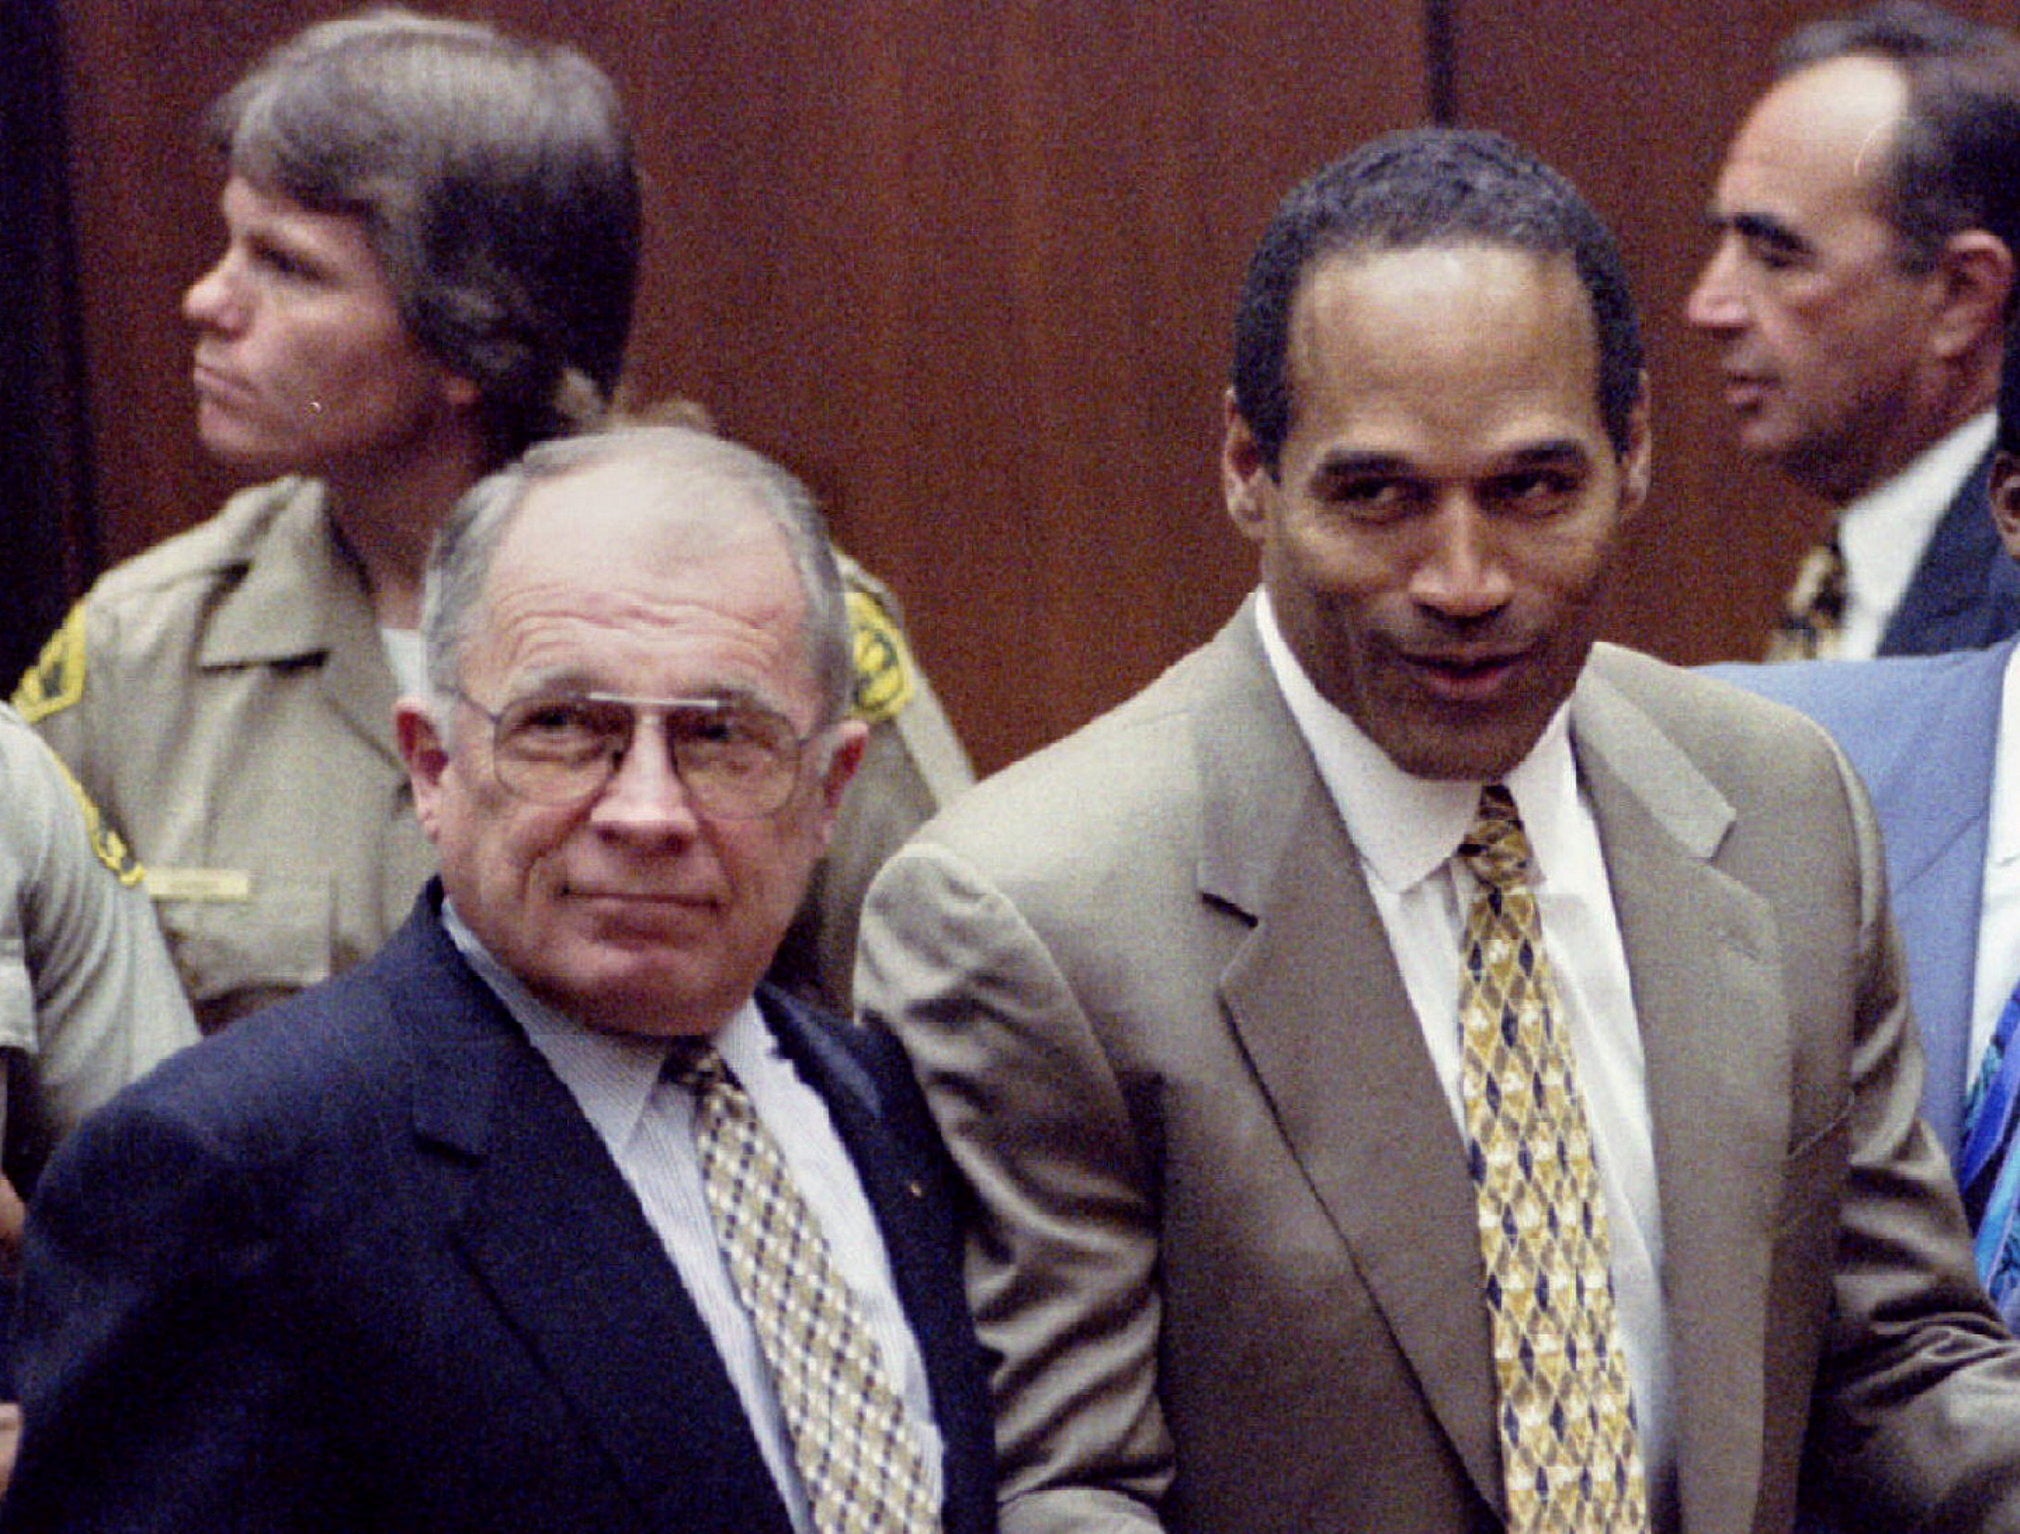 OJ Simpson was subsequently acquitted after what became known as the “Trial of the Century” but reed forever associated with the killings